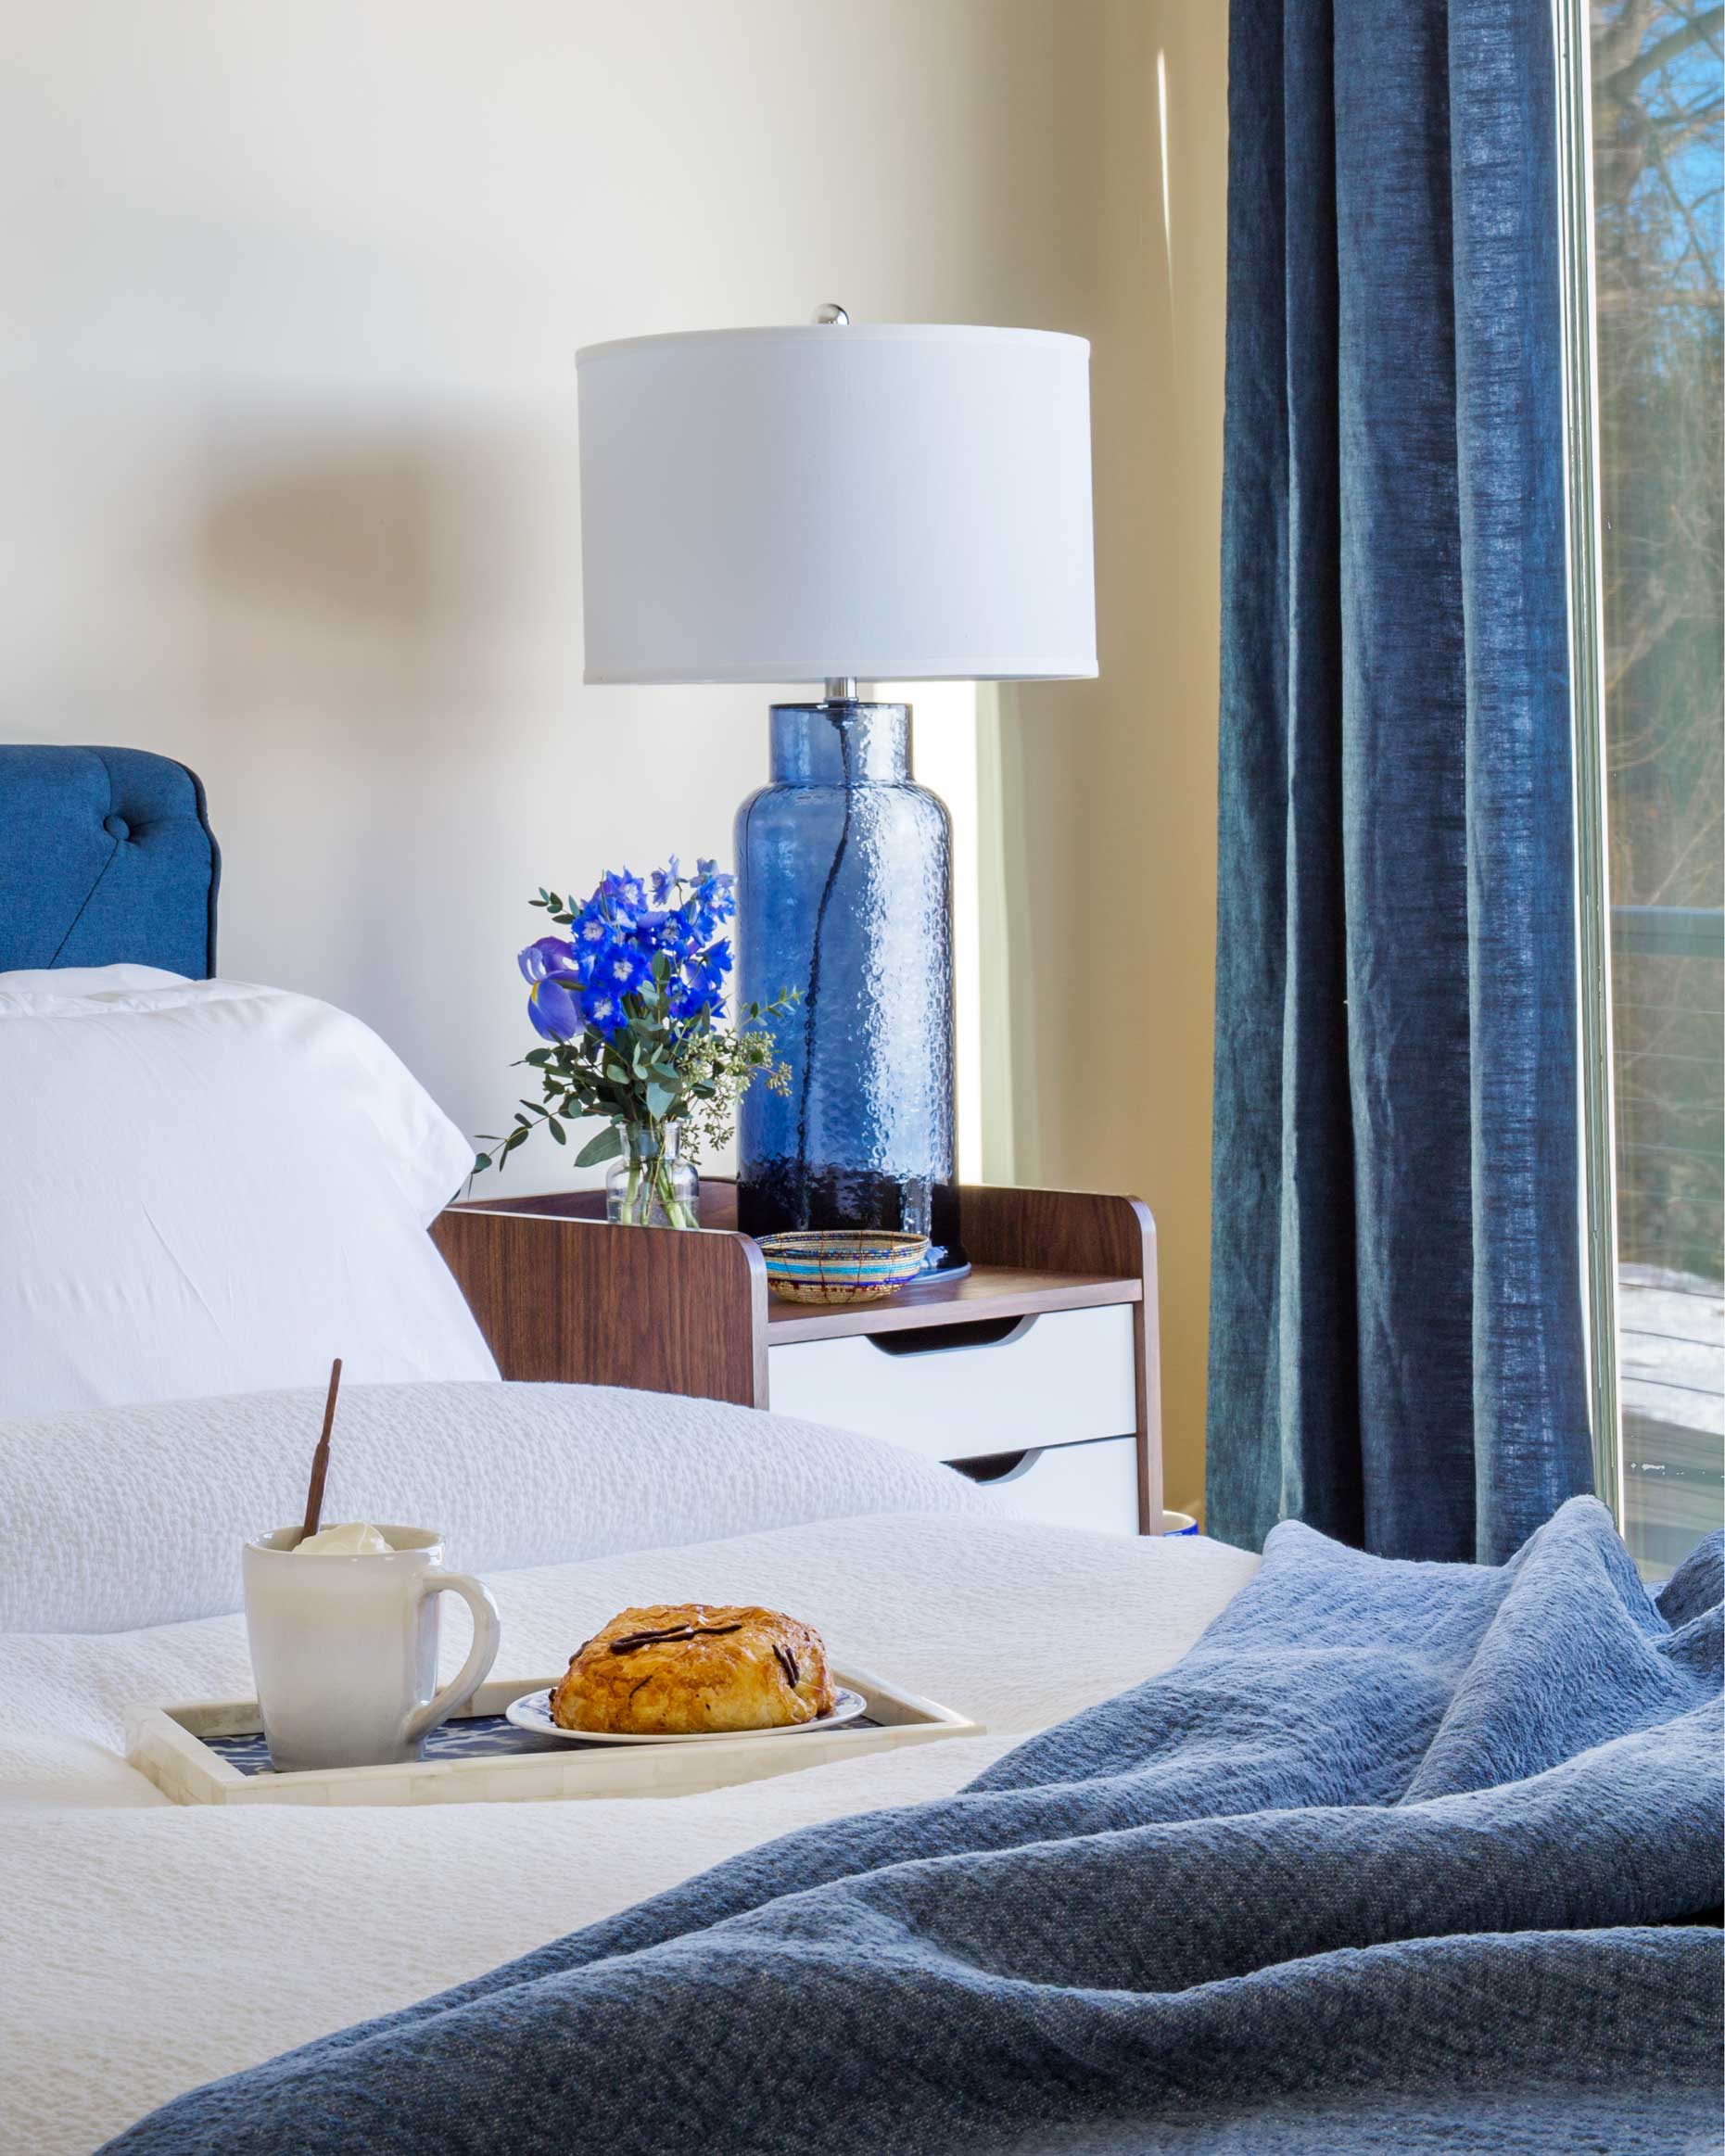 Stay in bed while! Lake views and soft organic bedding will make you want to linger.